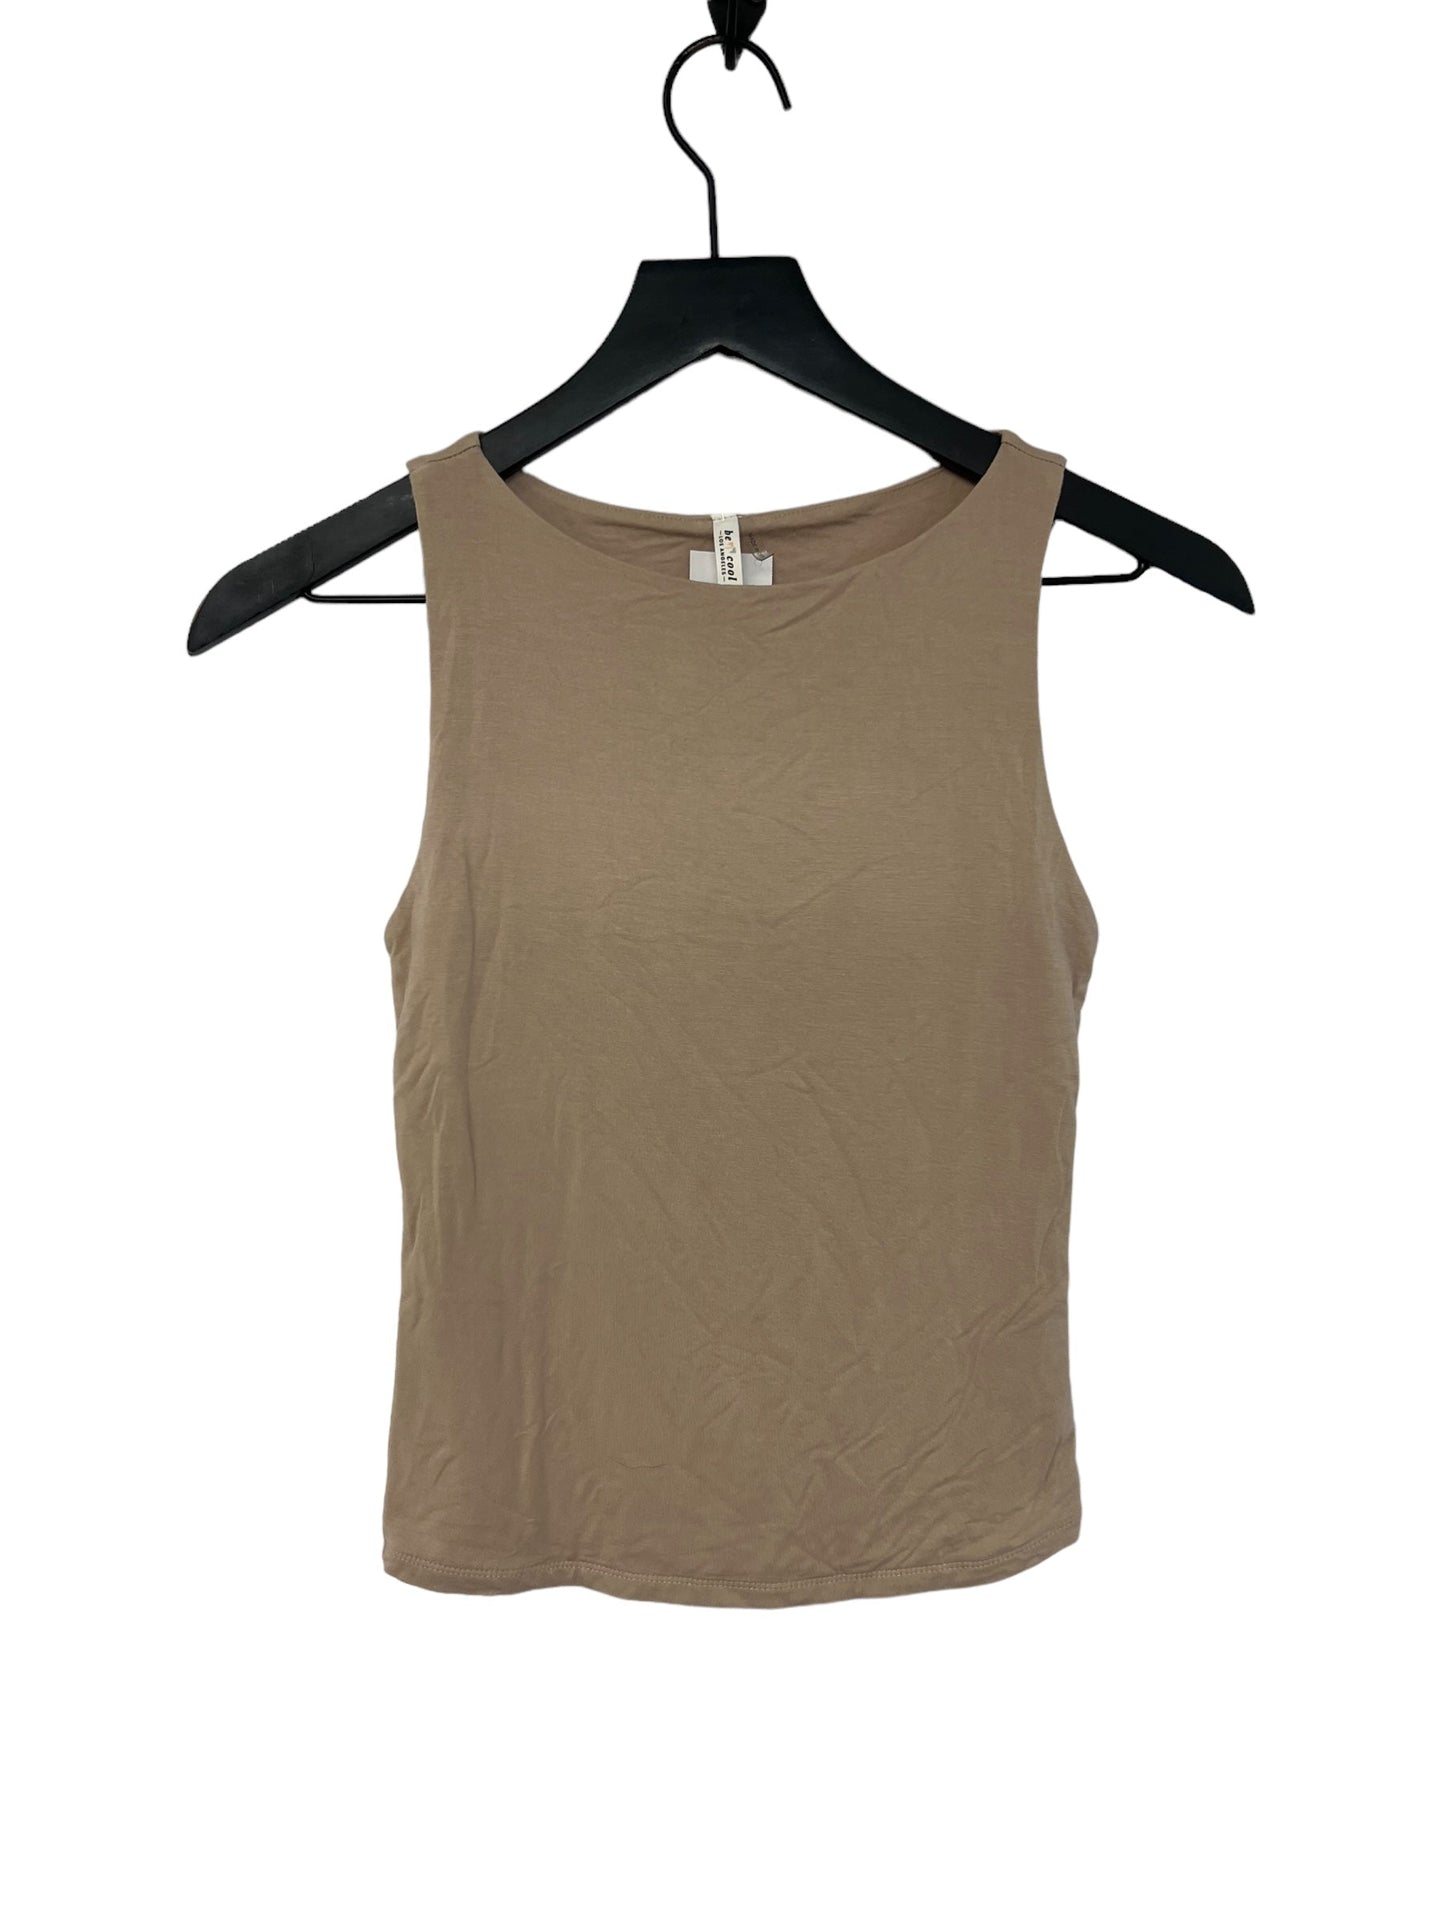 Beige Top Sleeveless Basic Clothes Mentor, Size S